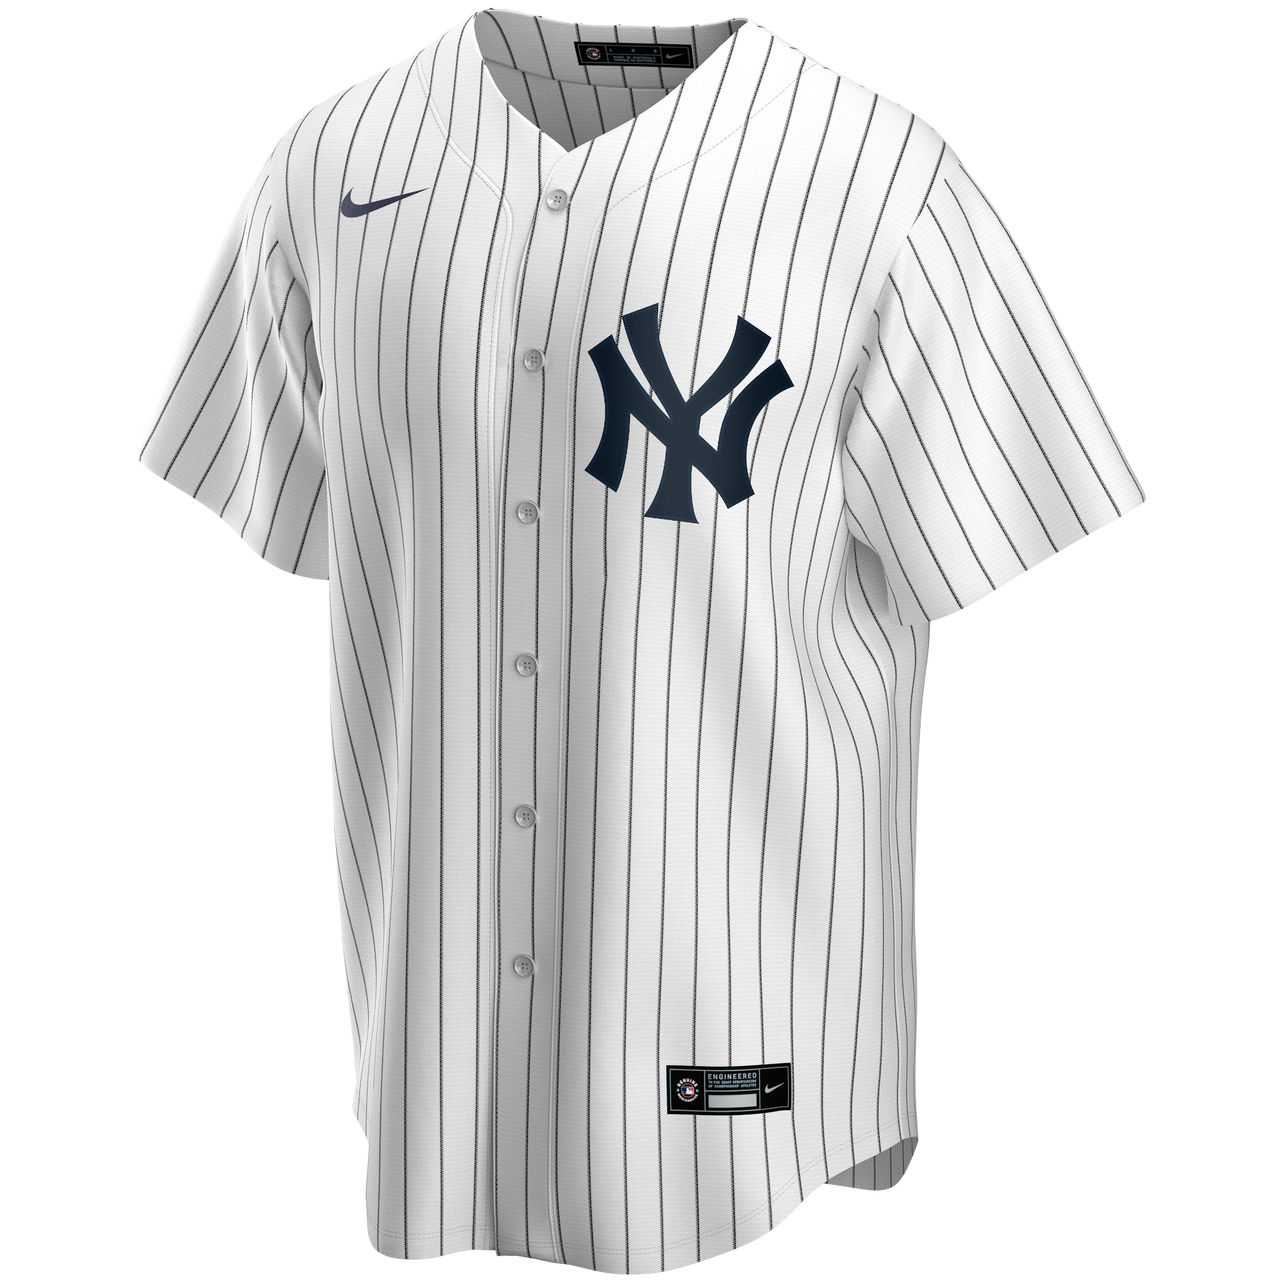 Men's Nike Babe Ruth New York Yankees Cooperstown Collection